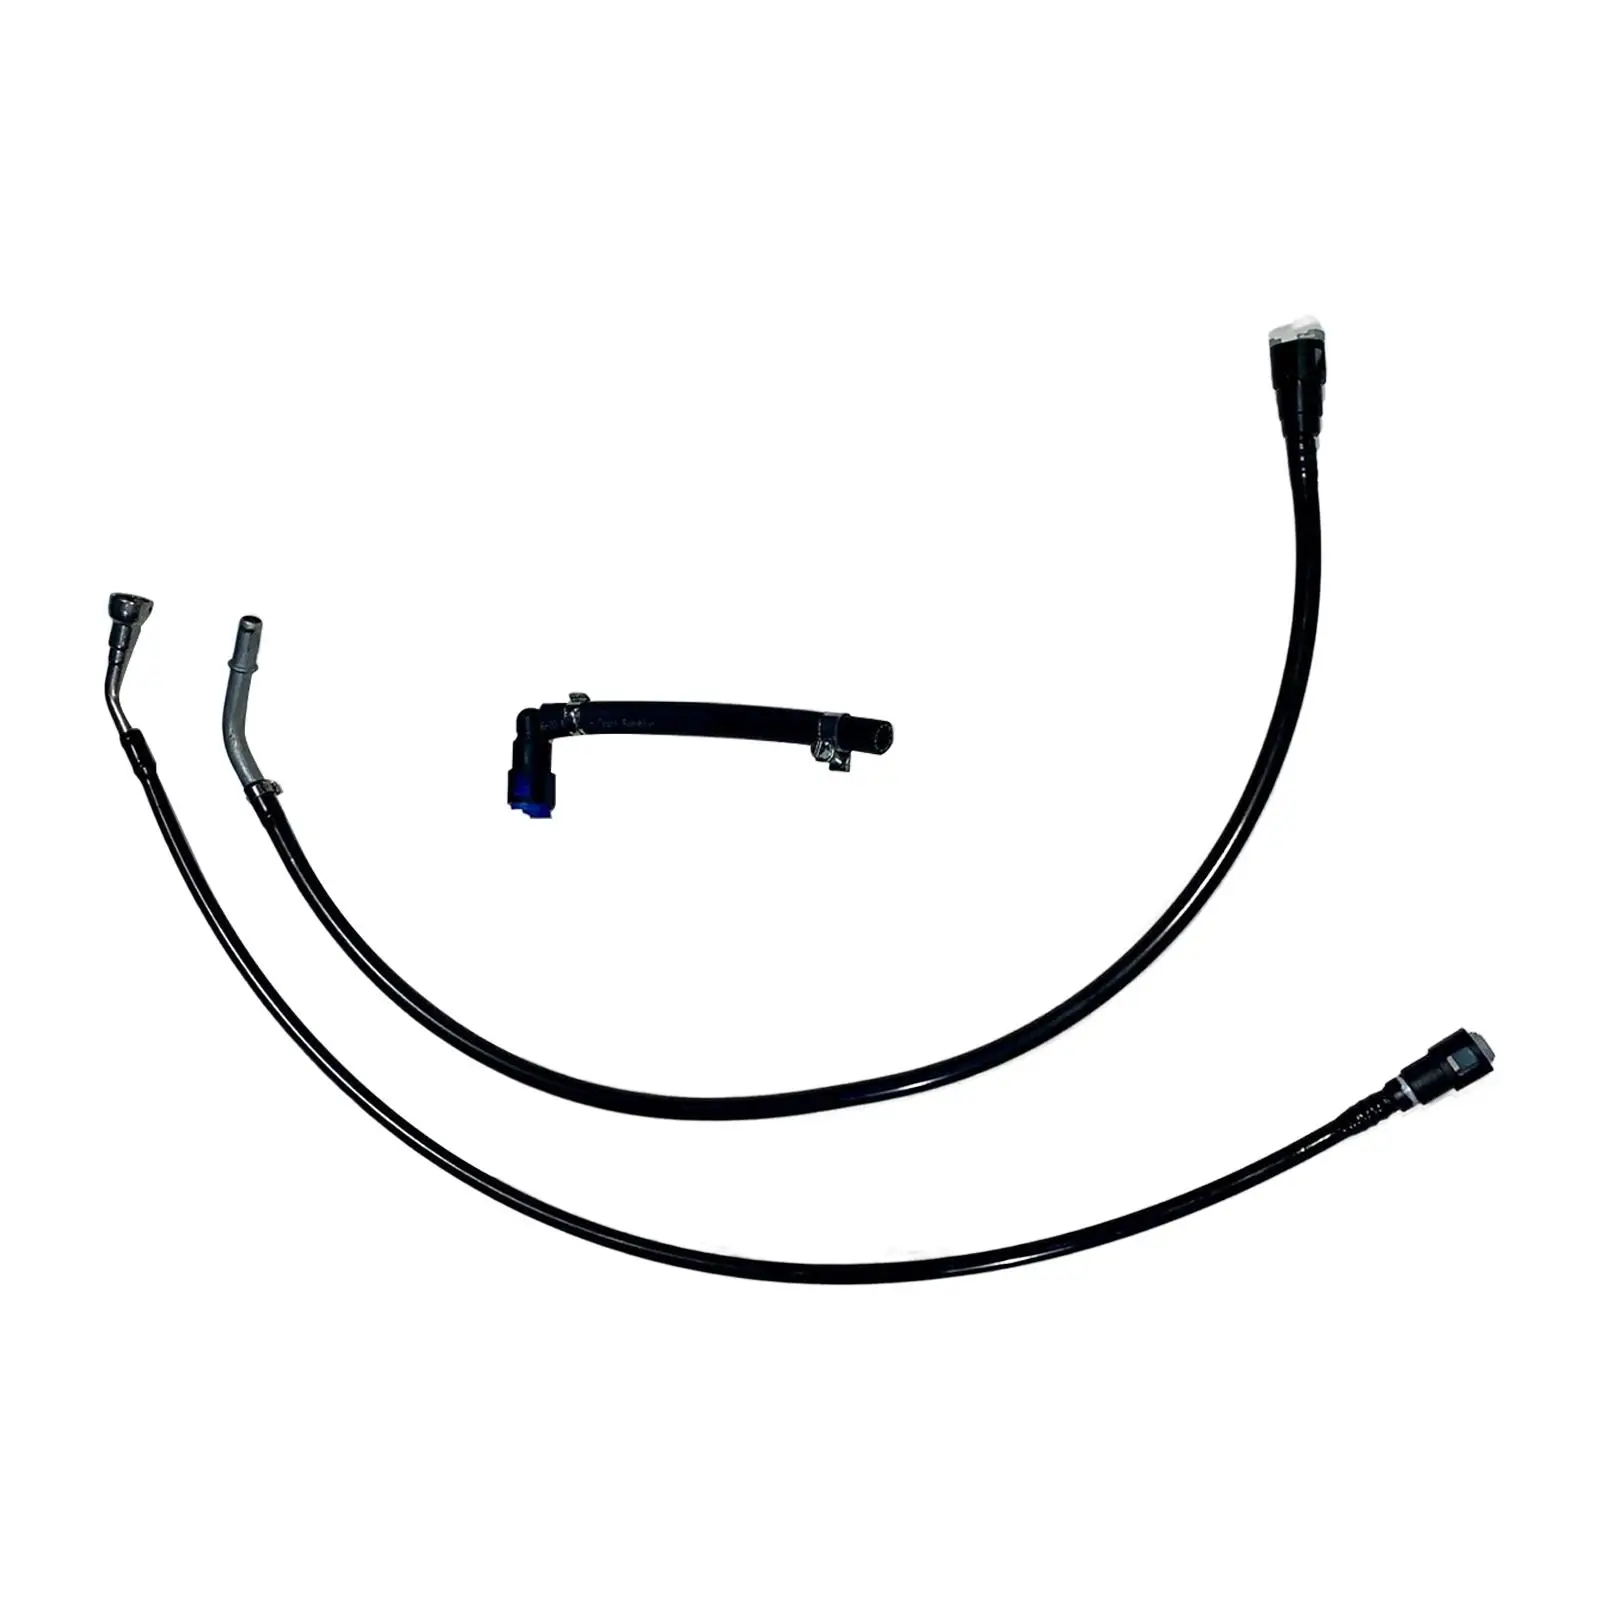 Fuel Line Set fl Fg0918 Stable Replacement Auto Accessories for Grand Cherokee